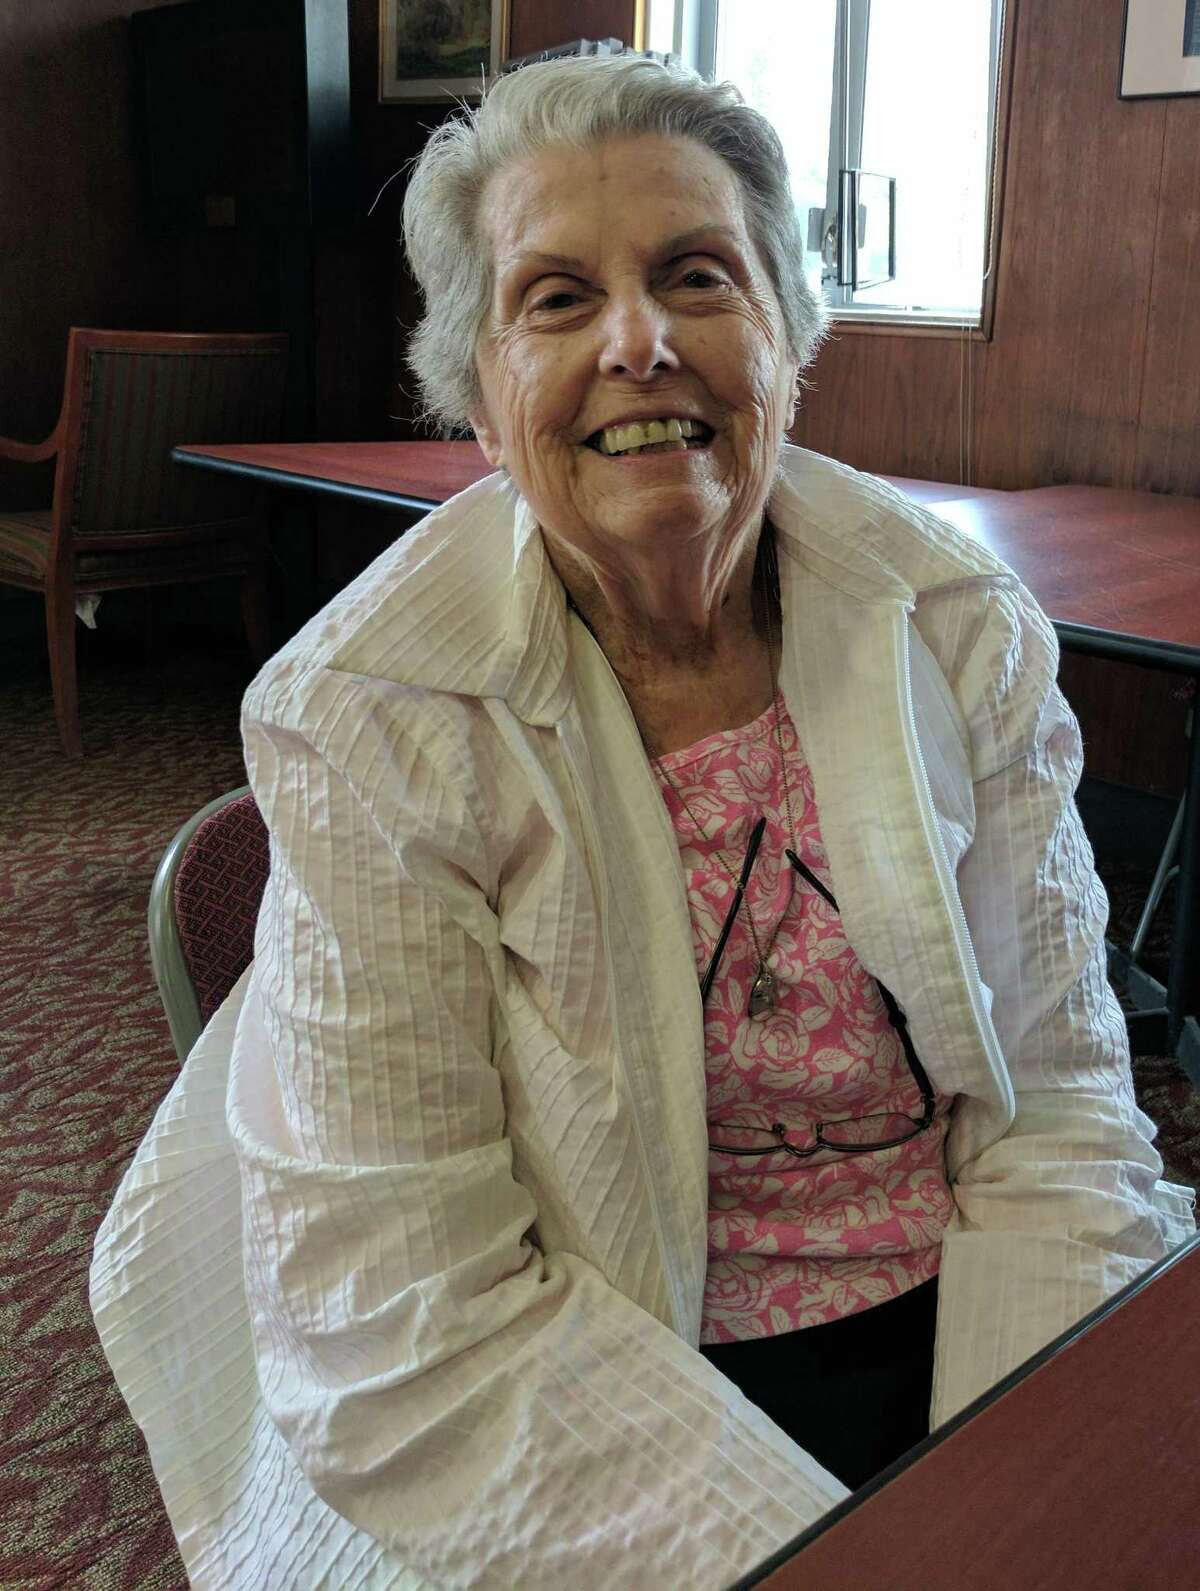 Janet Vojt, 86, has lived on North Water Street for more than 50 years and was a nurse at Greenwich Hospital.